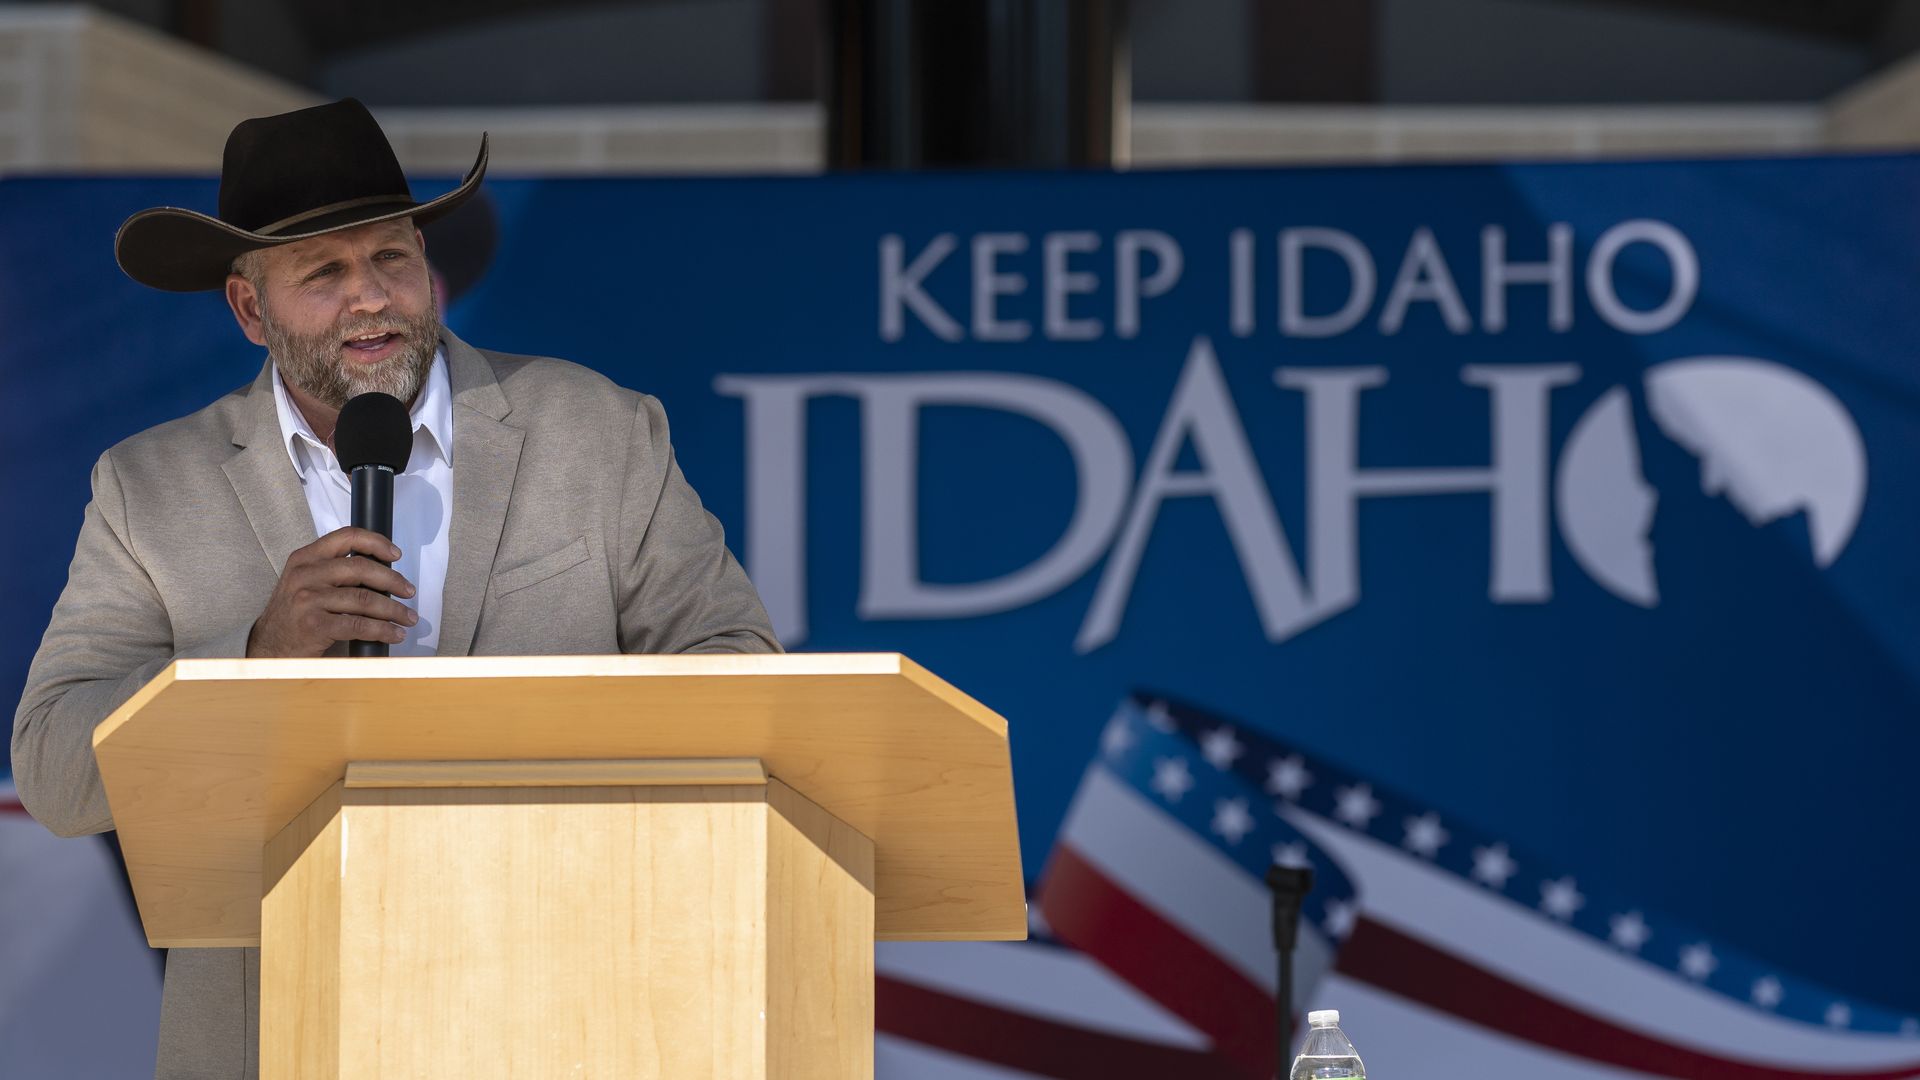 Ammon Bundy announcing his candidacy on June 19 in Boise, Idaho.